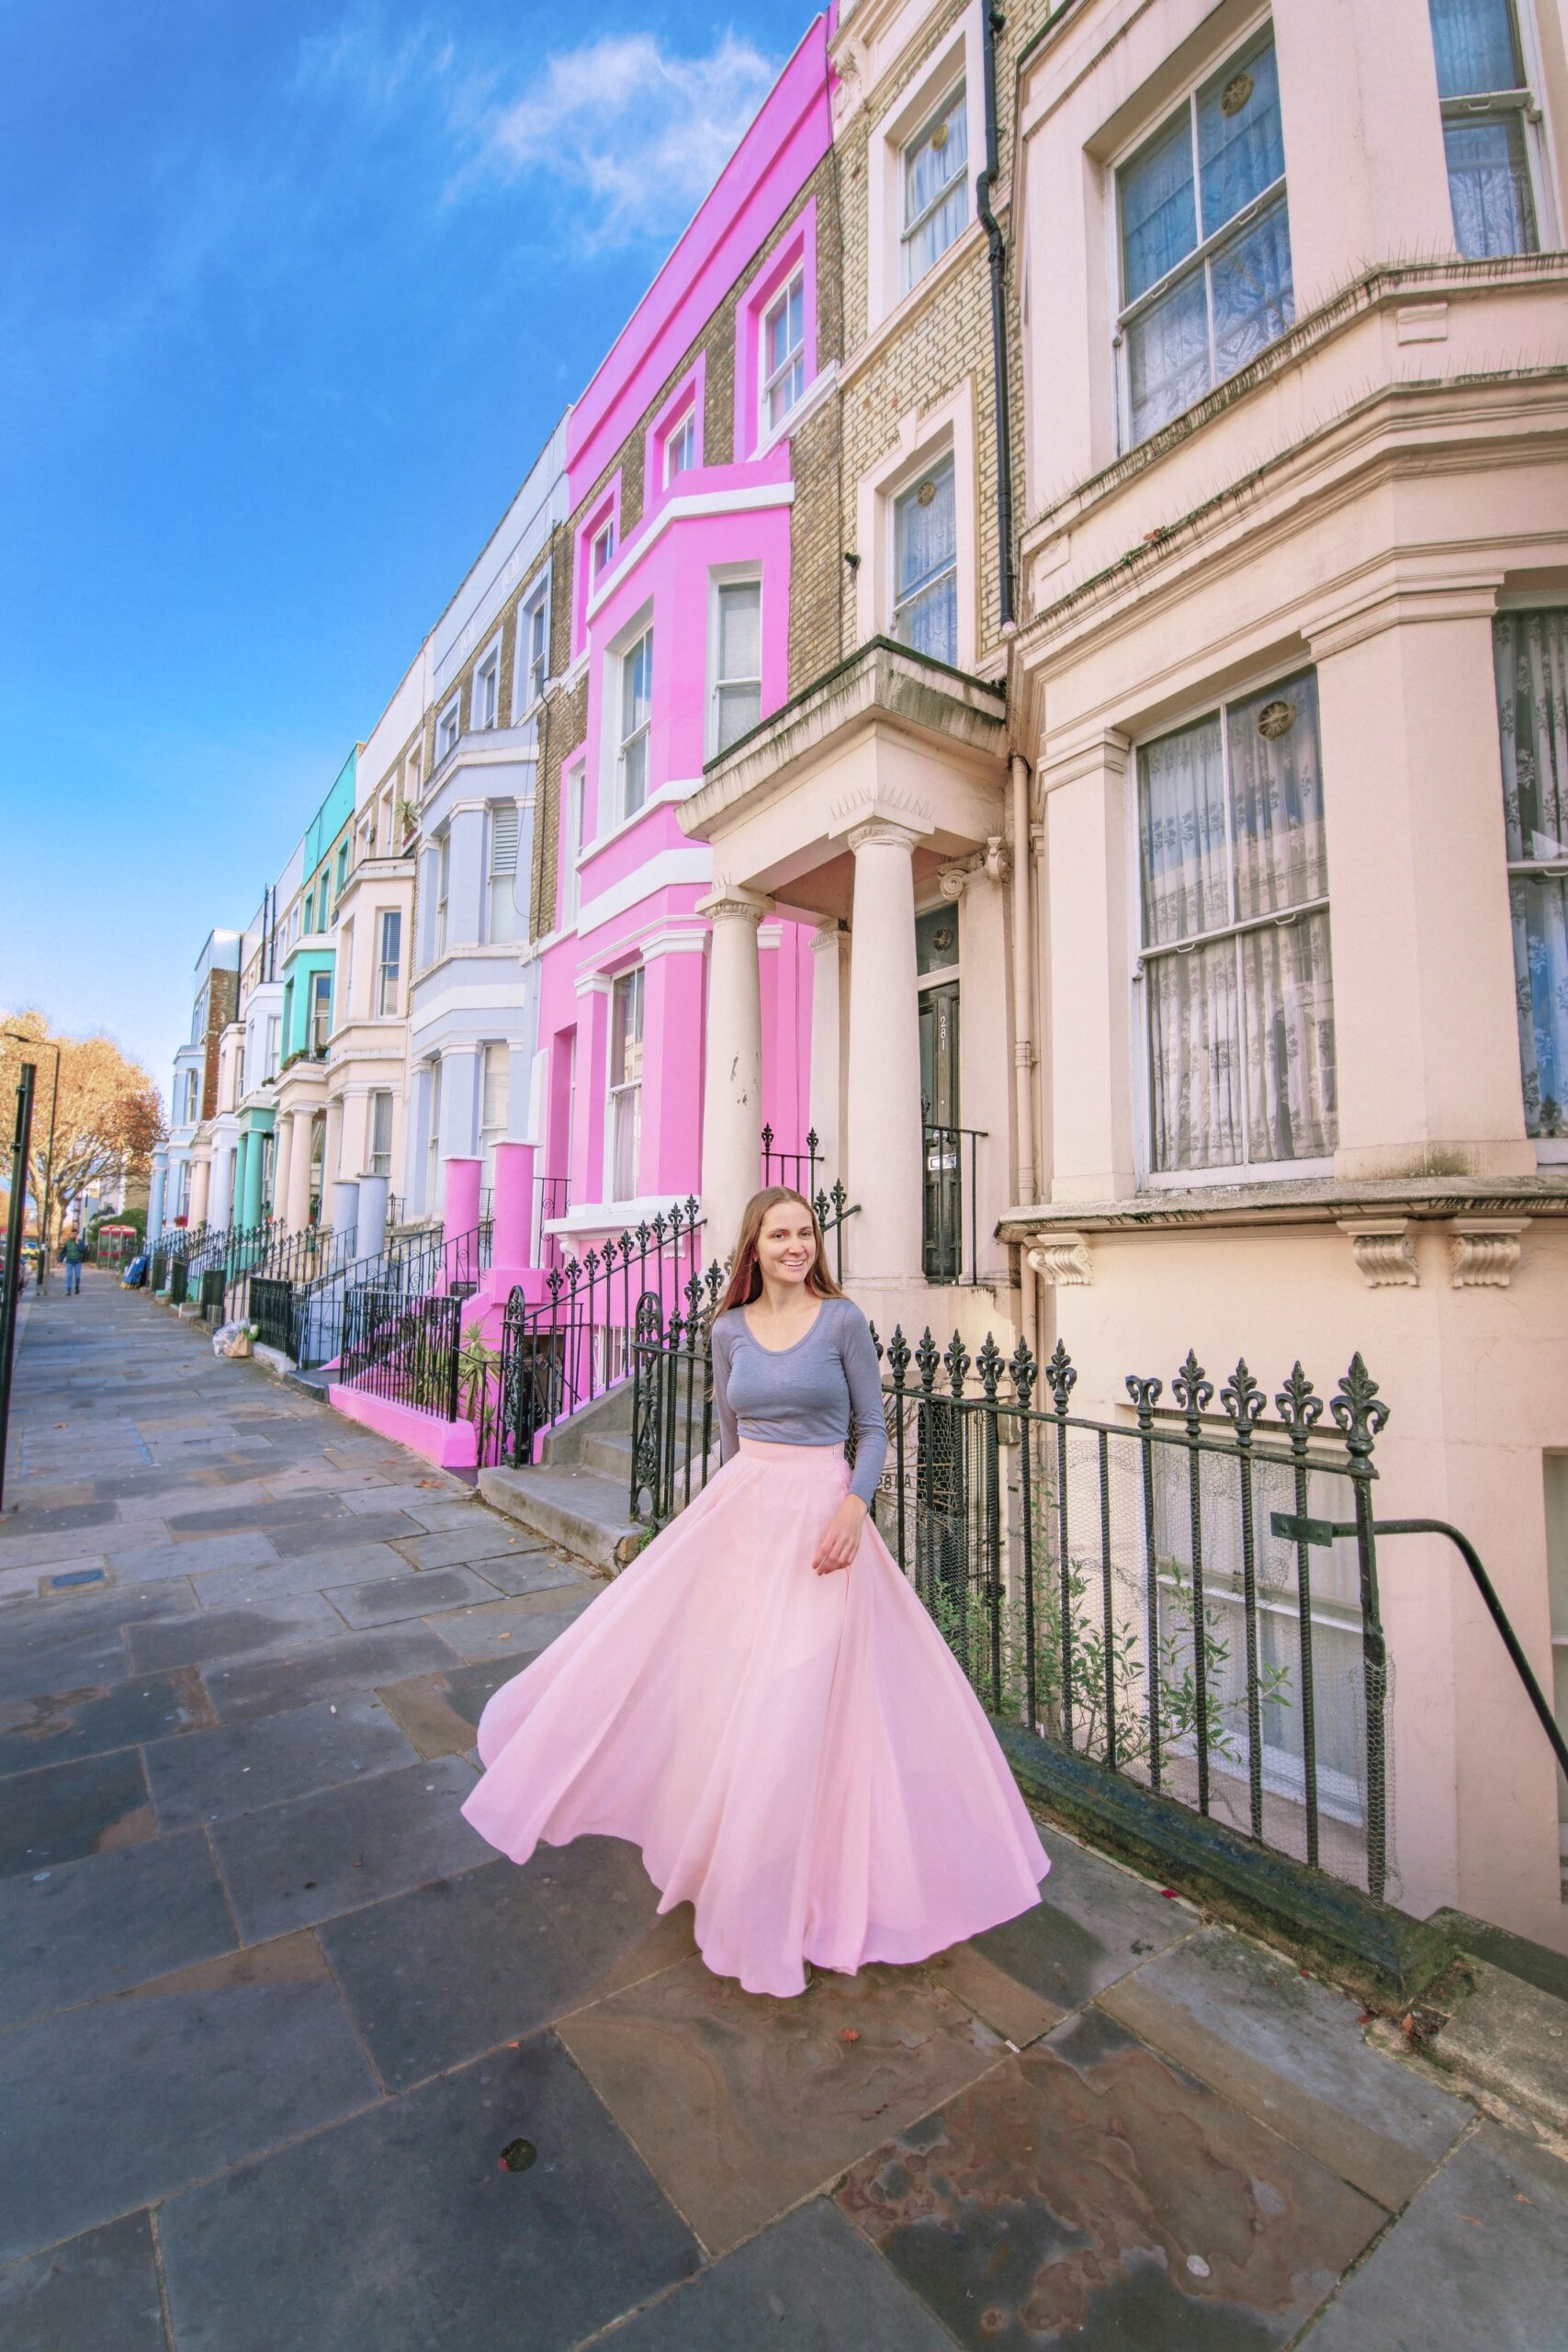 a girl in a pink skirt standing in front of the colorful homes in nottinghil